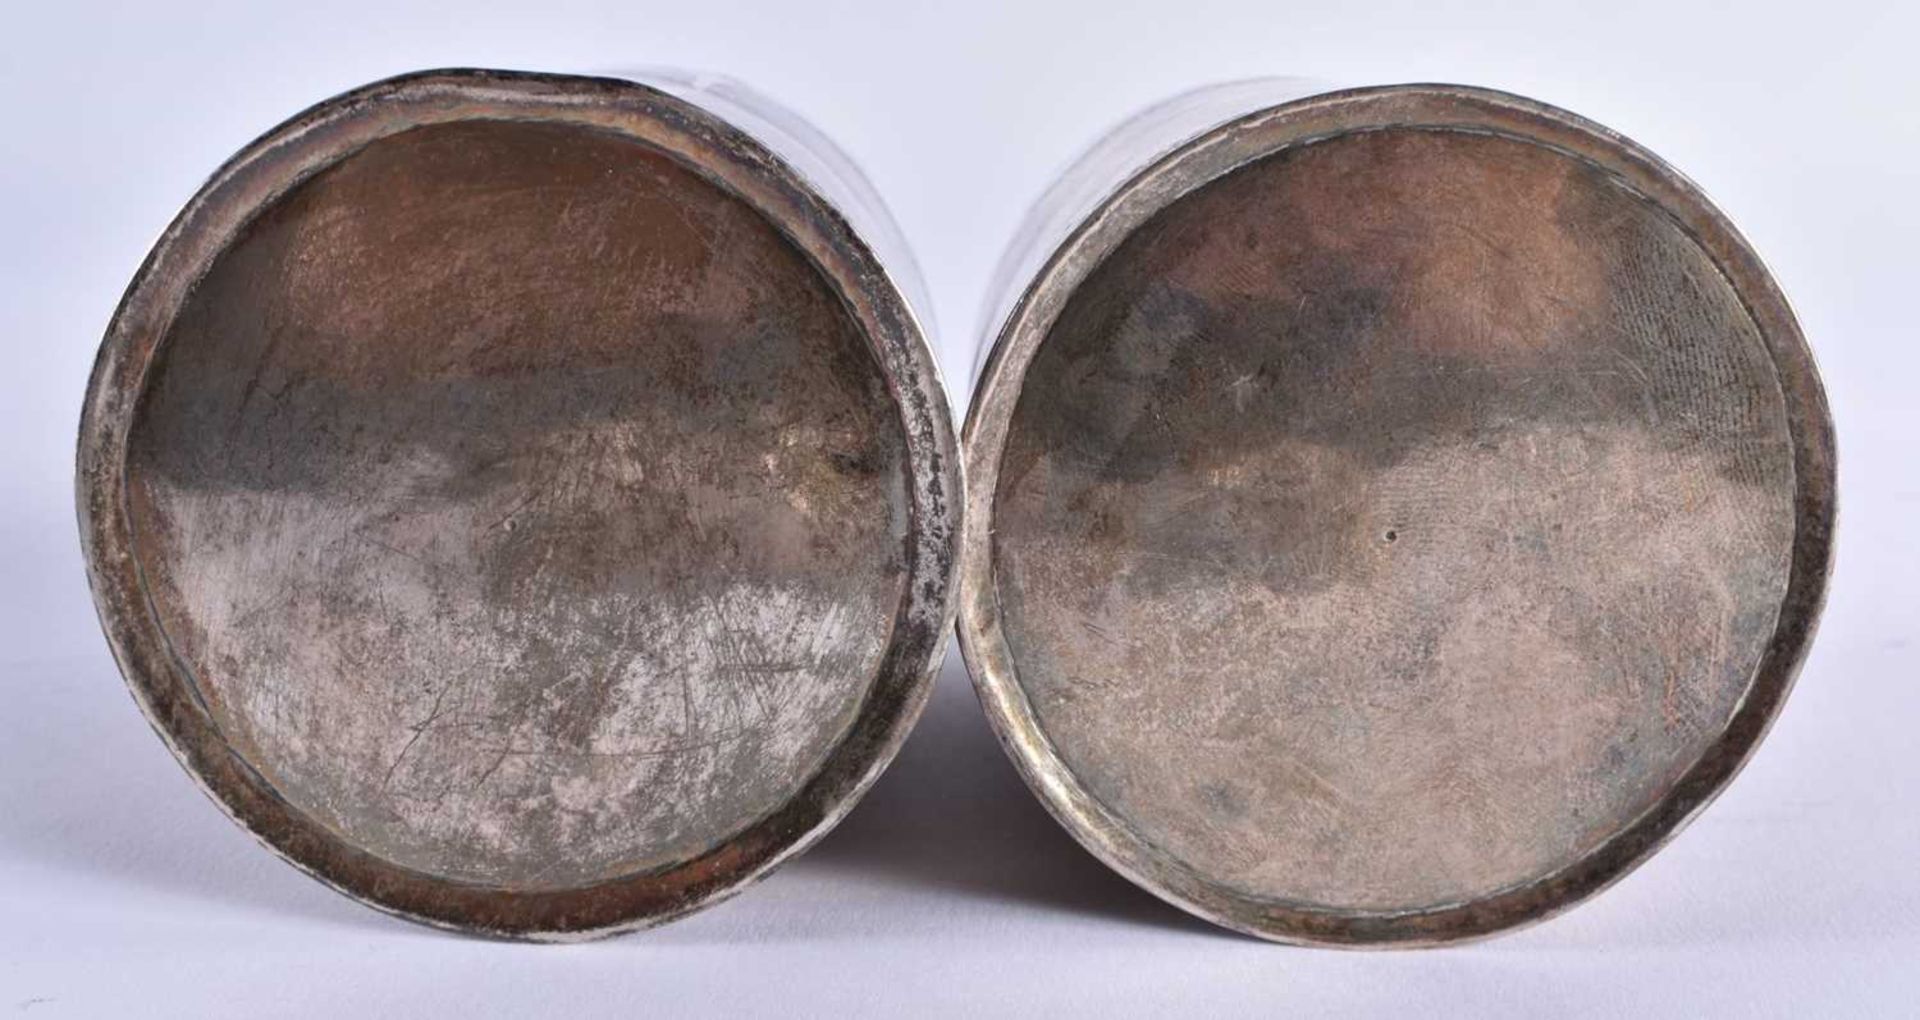 A PAIR OF ANTIQUE CONTINENTAL SILVER COIN INSET BOXES AND COVERS. 344 grams. 9 cm x 7.25 cm. - Image 6 of 6